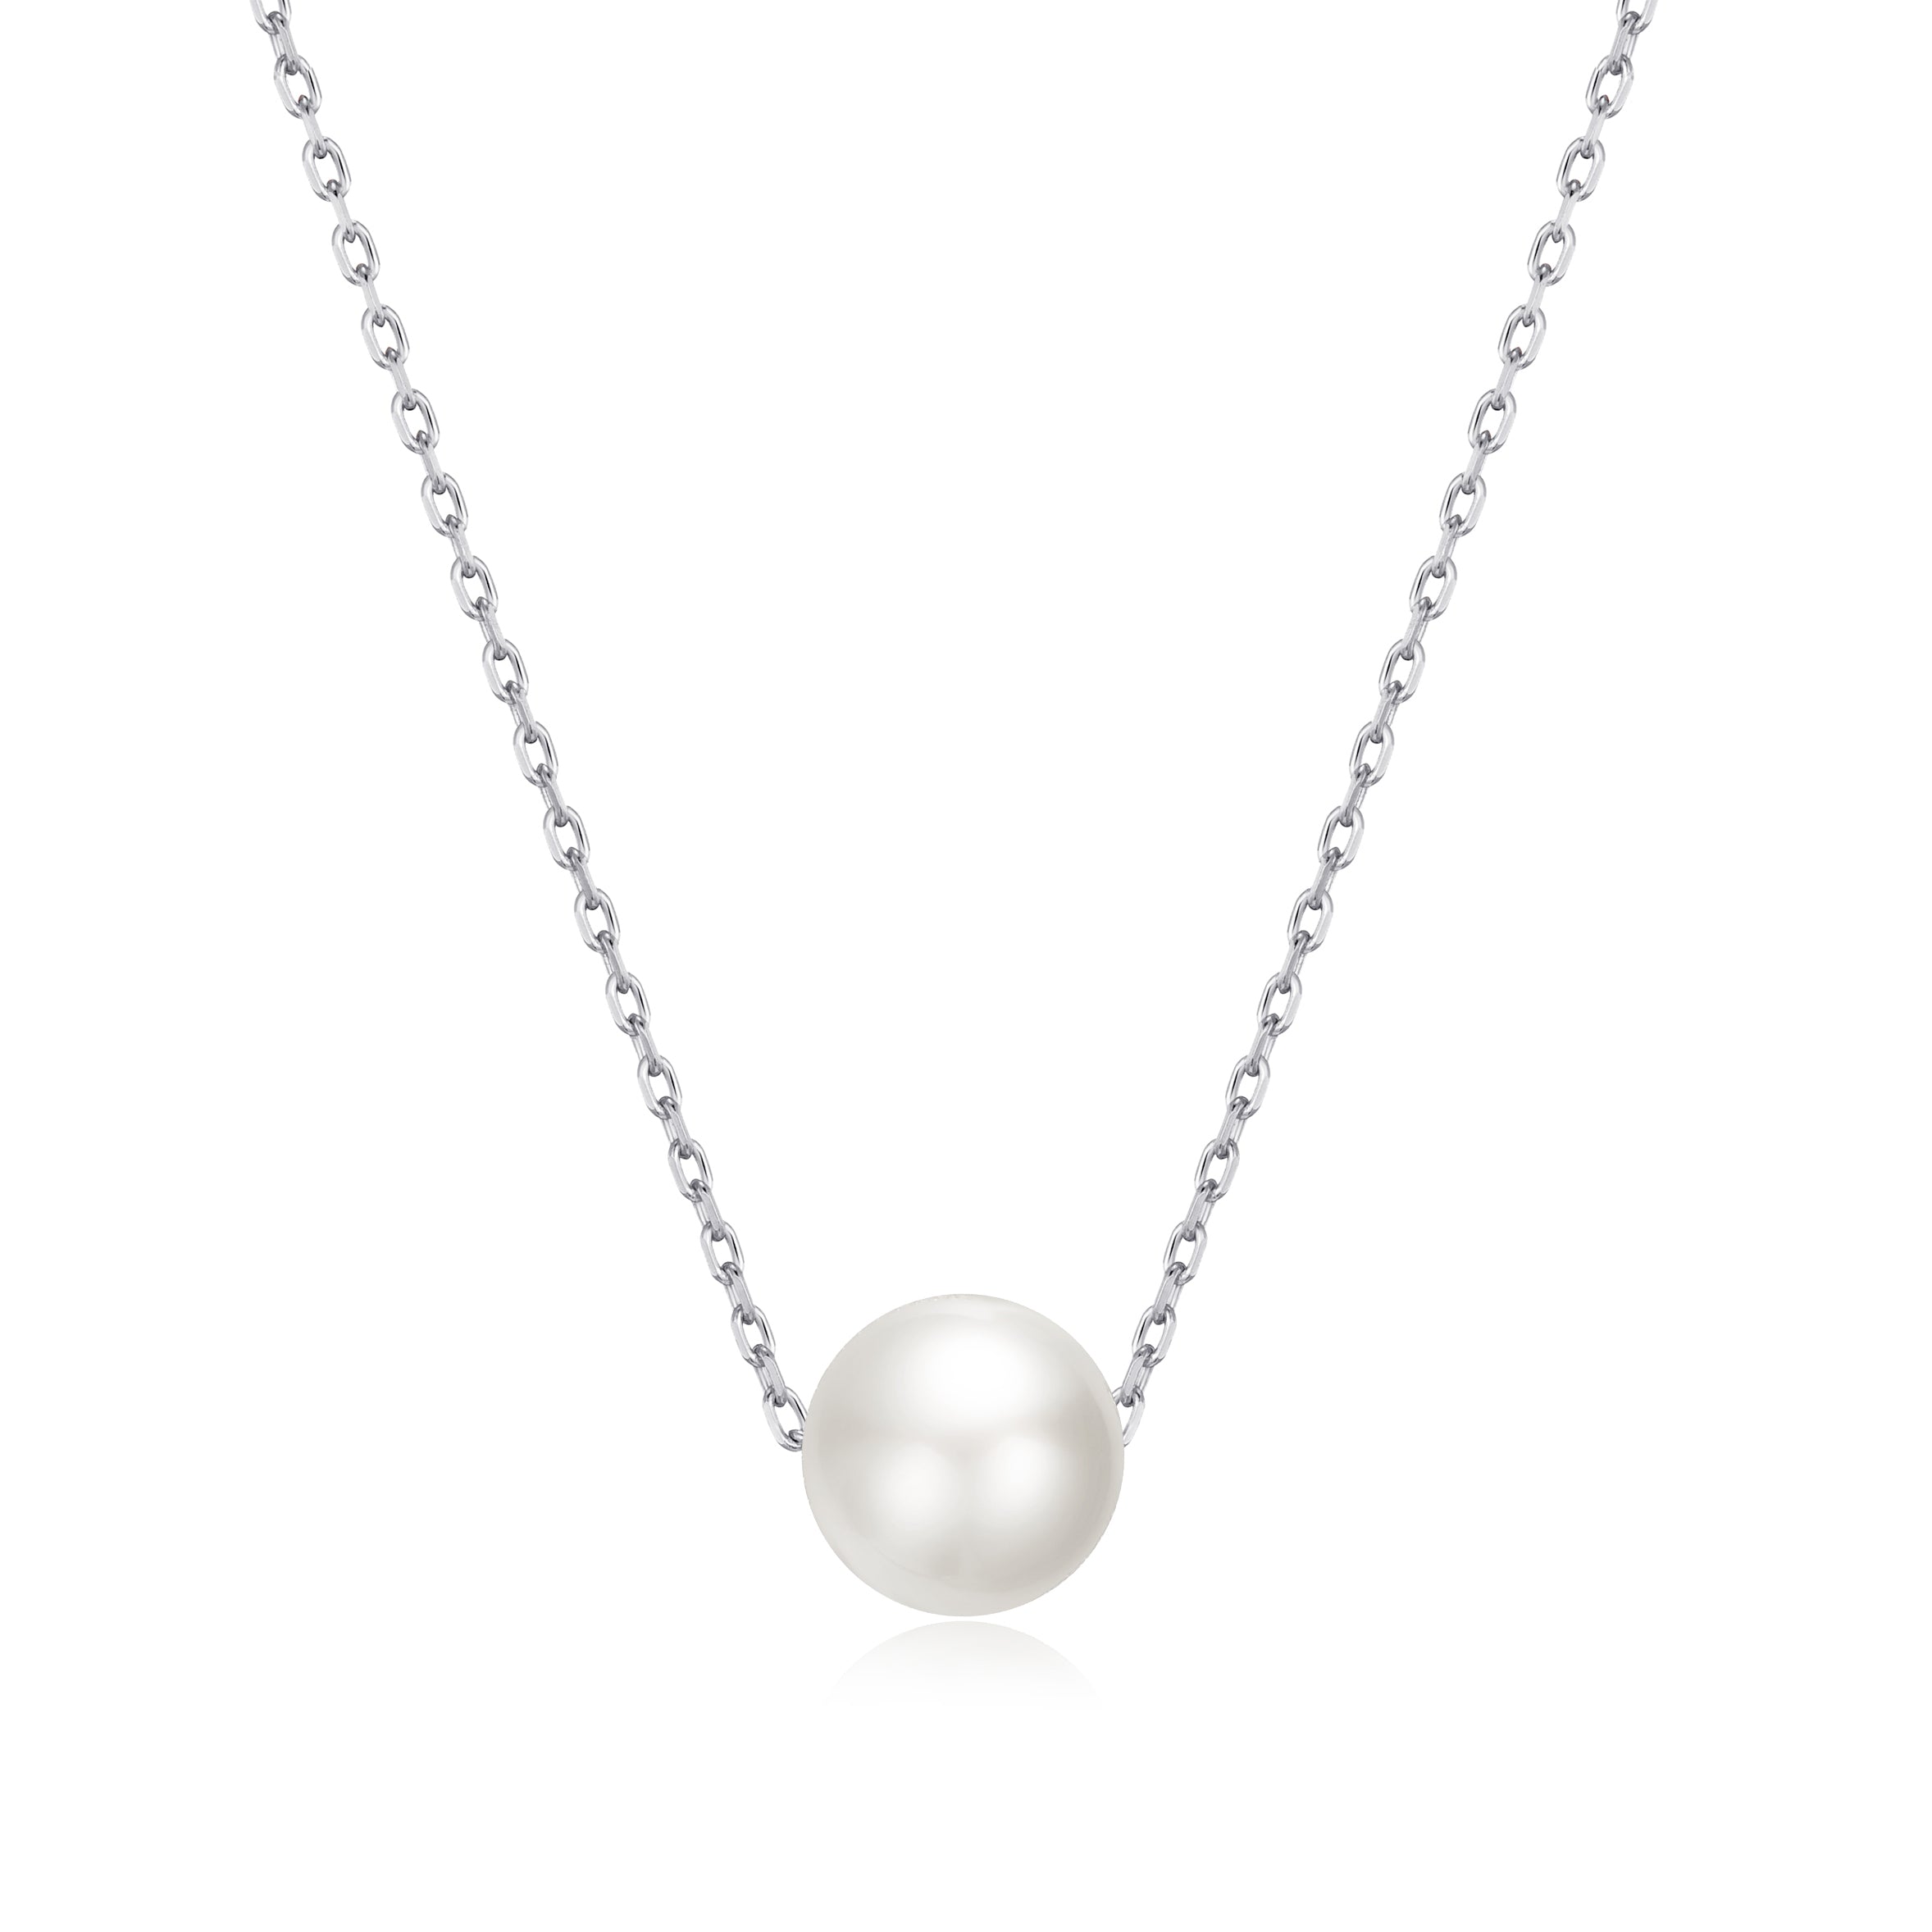 Silver Plated Single Pearl Necklace by Philip Jones Jewellery